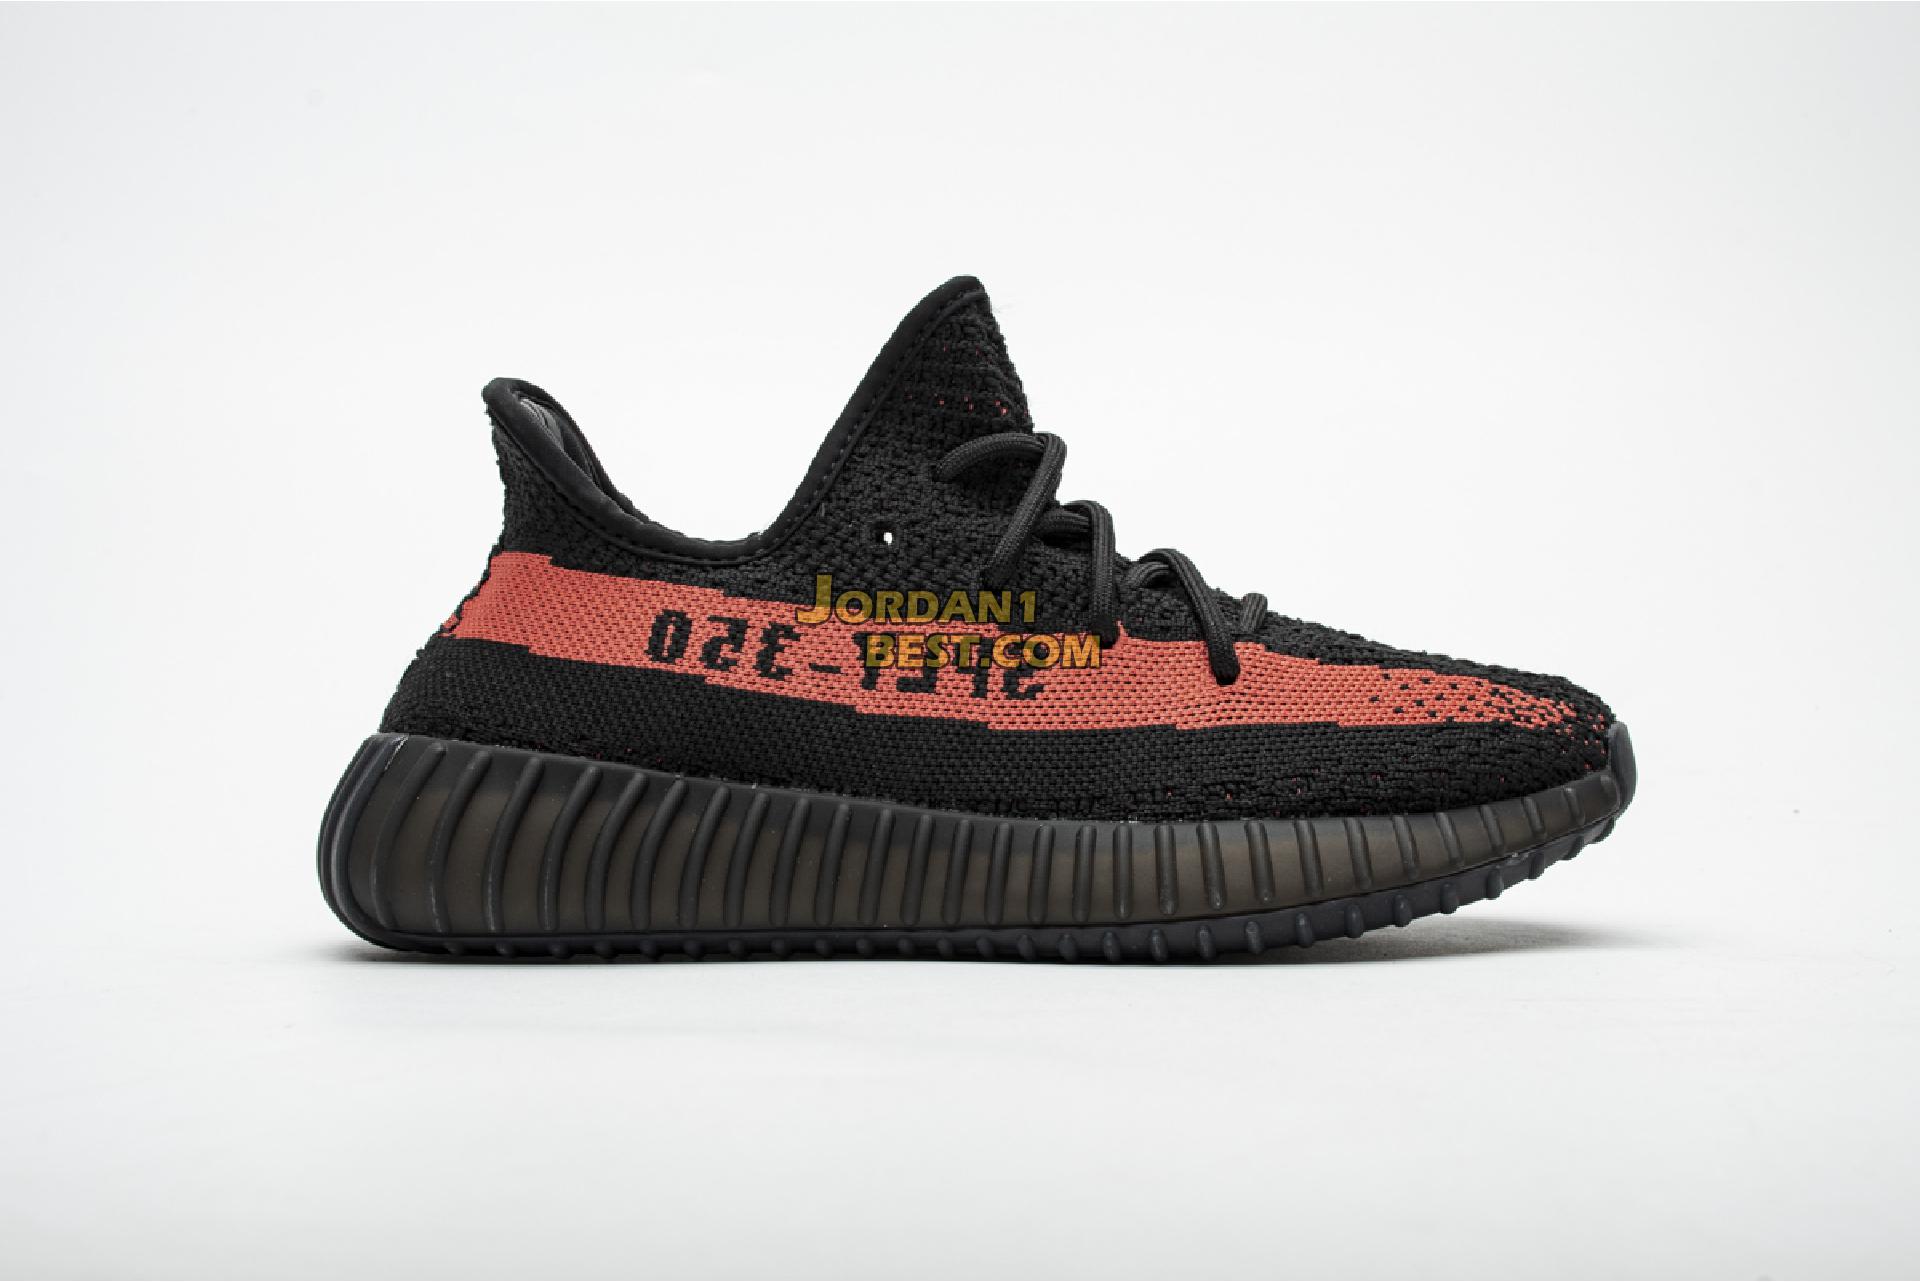 Adidas Yeezy Boost 350 V2 "Red" BY9612